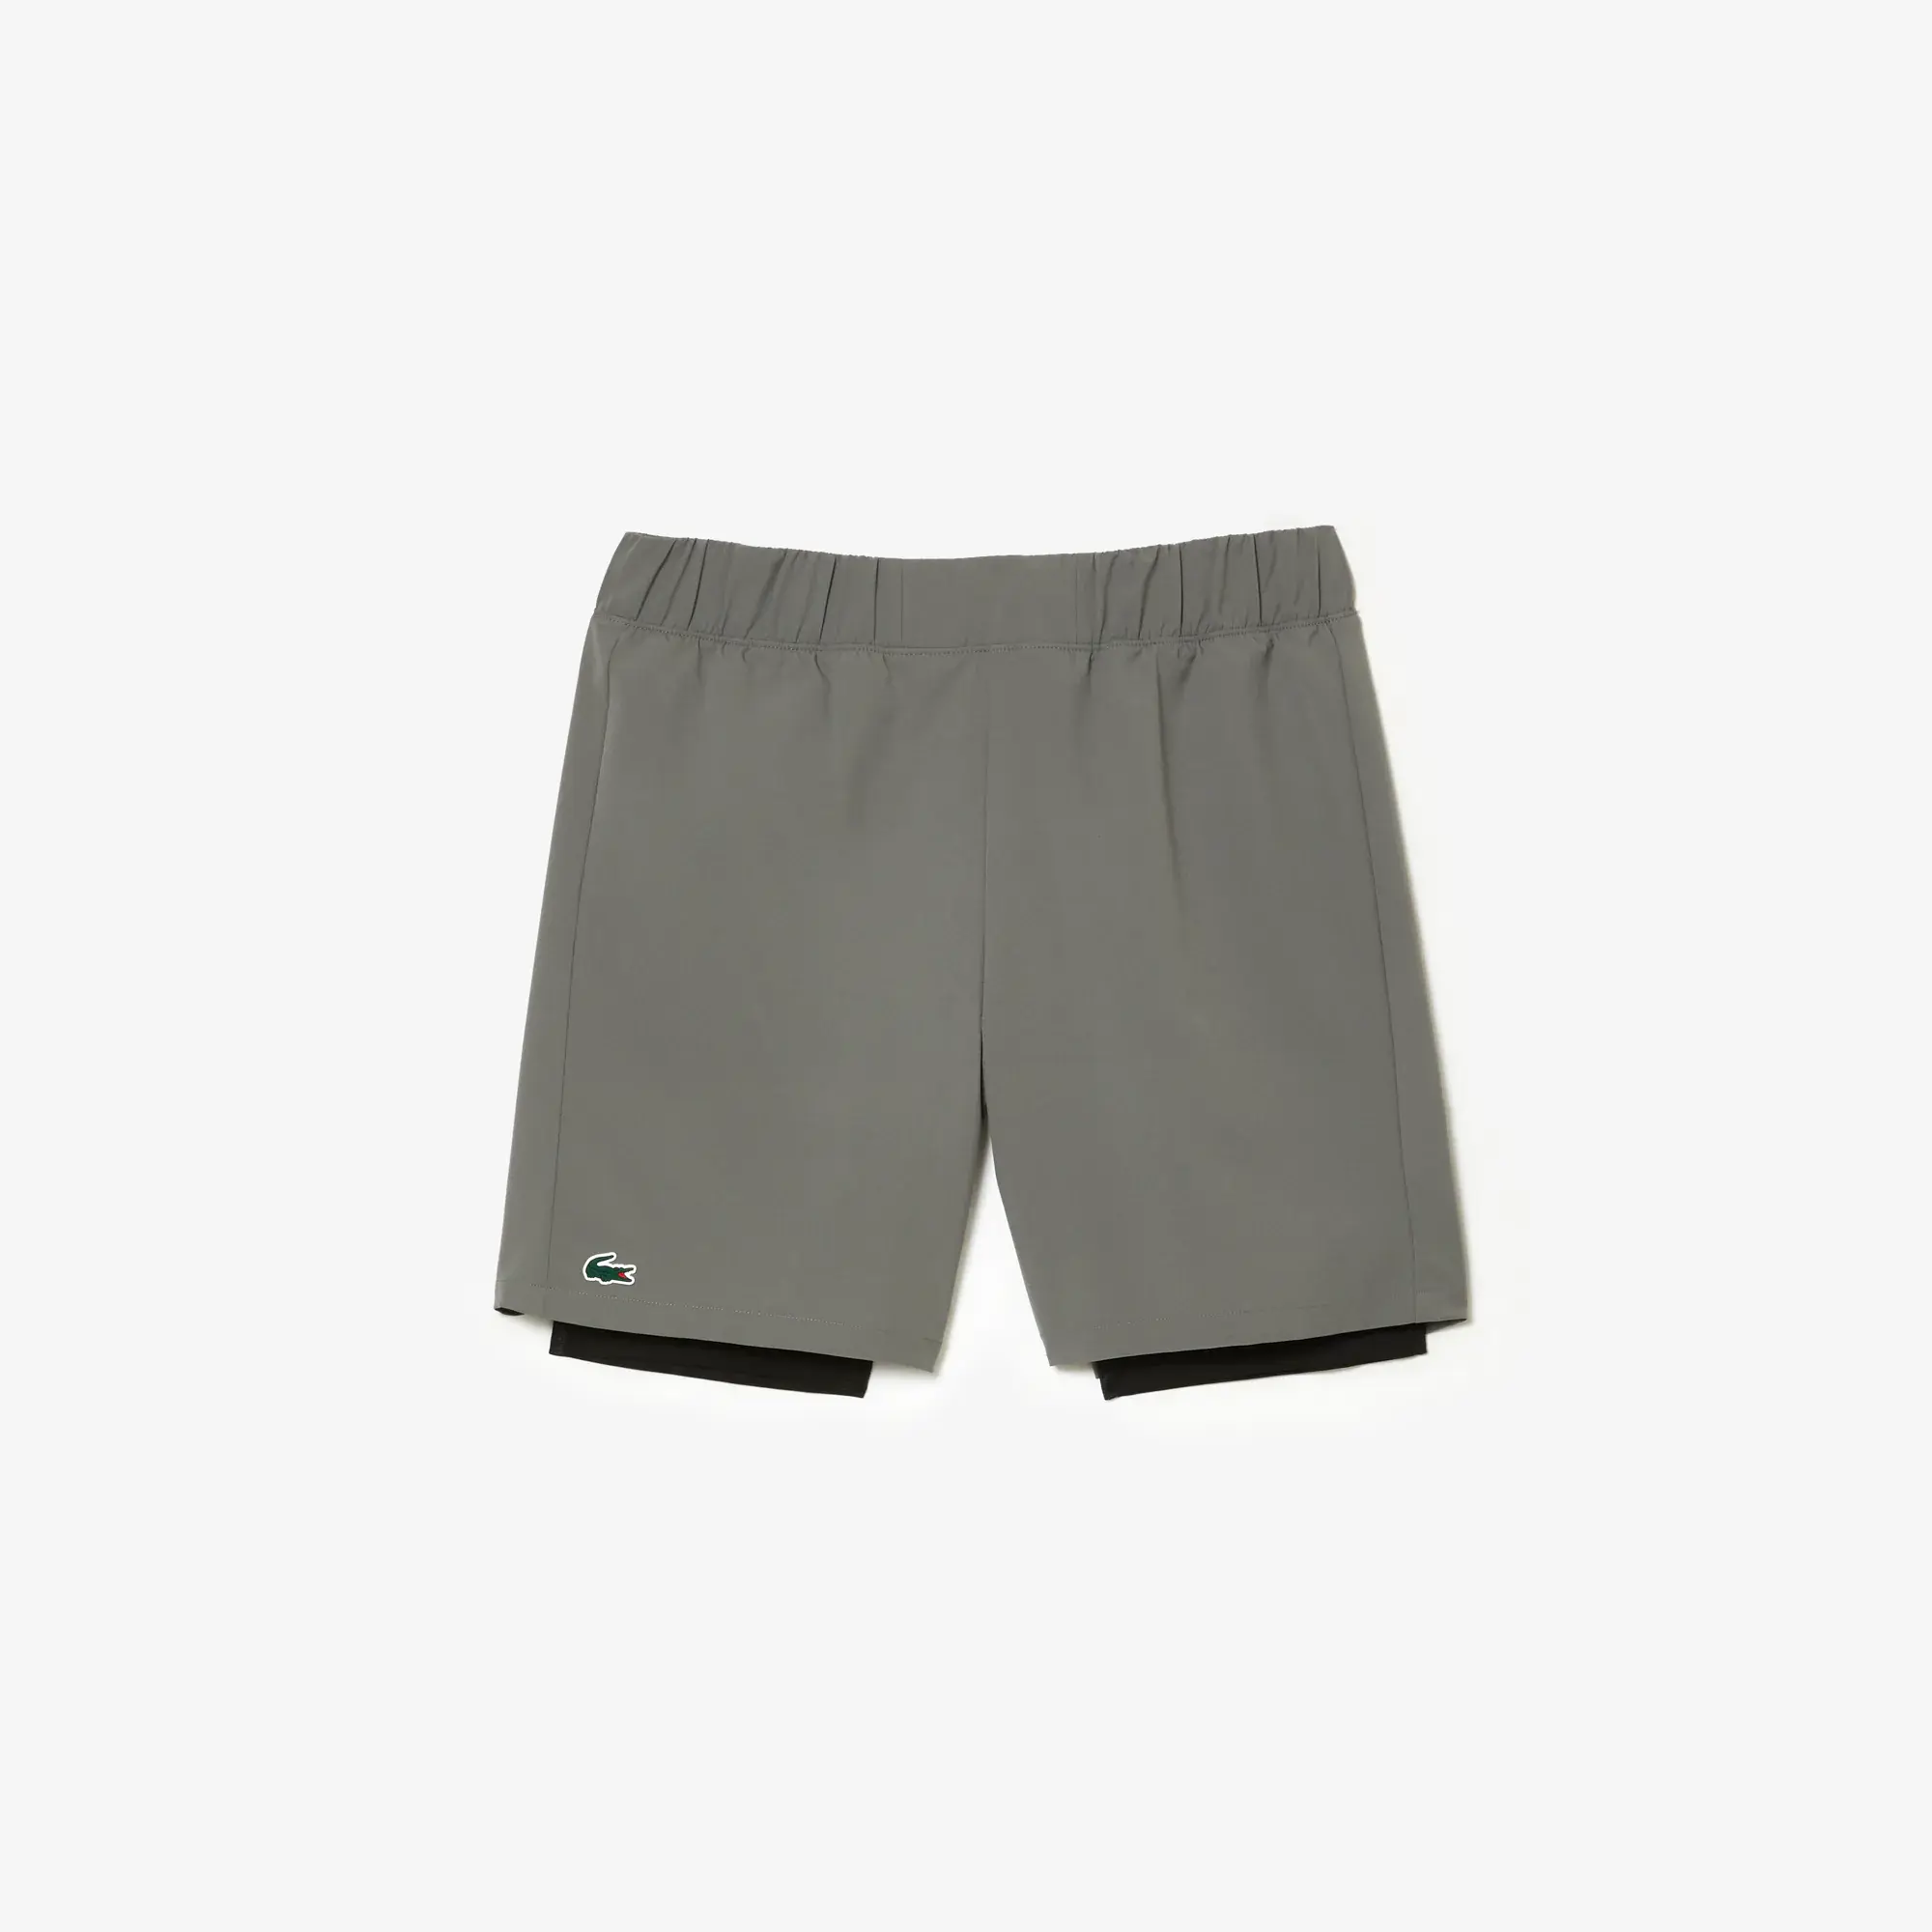 Lacoste Men’s Two-Tone SPORT Lined Shorts. 1